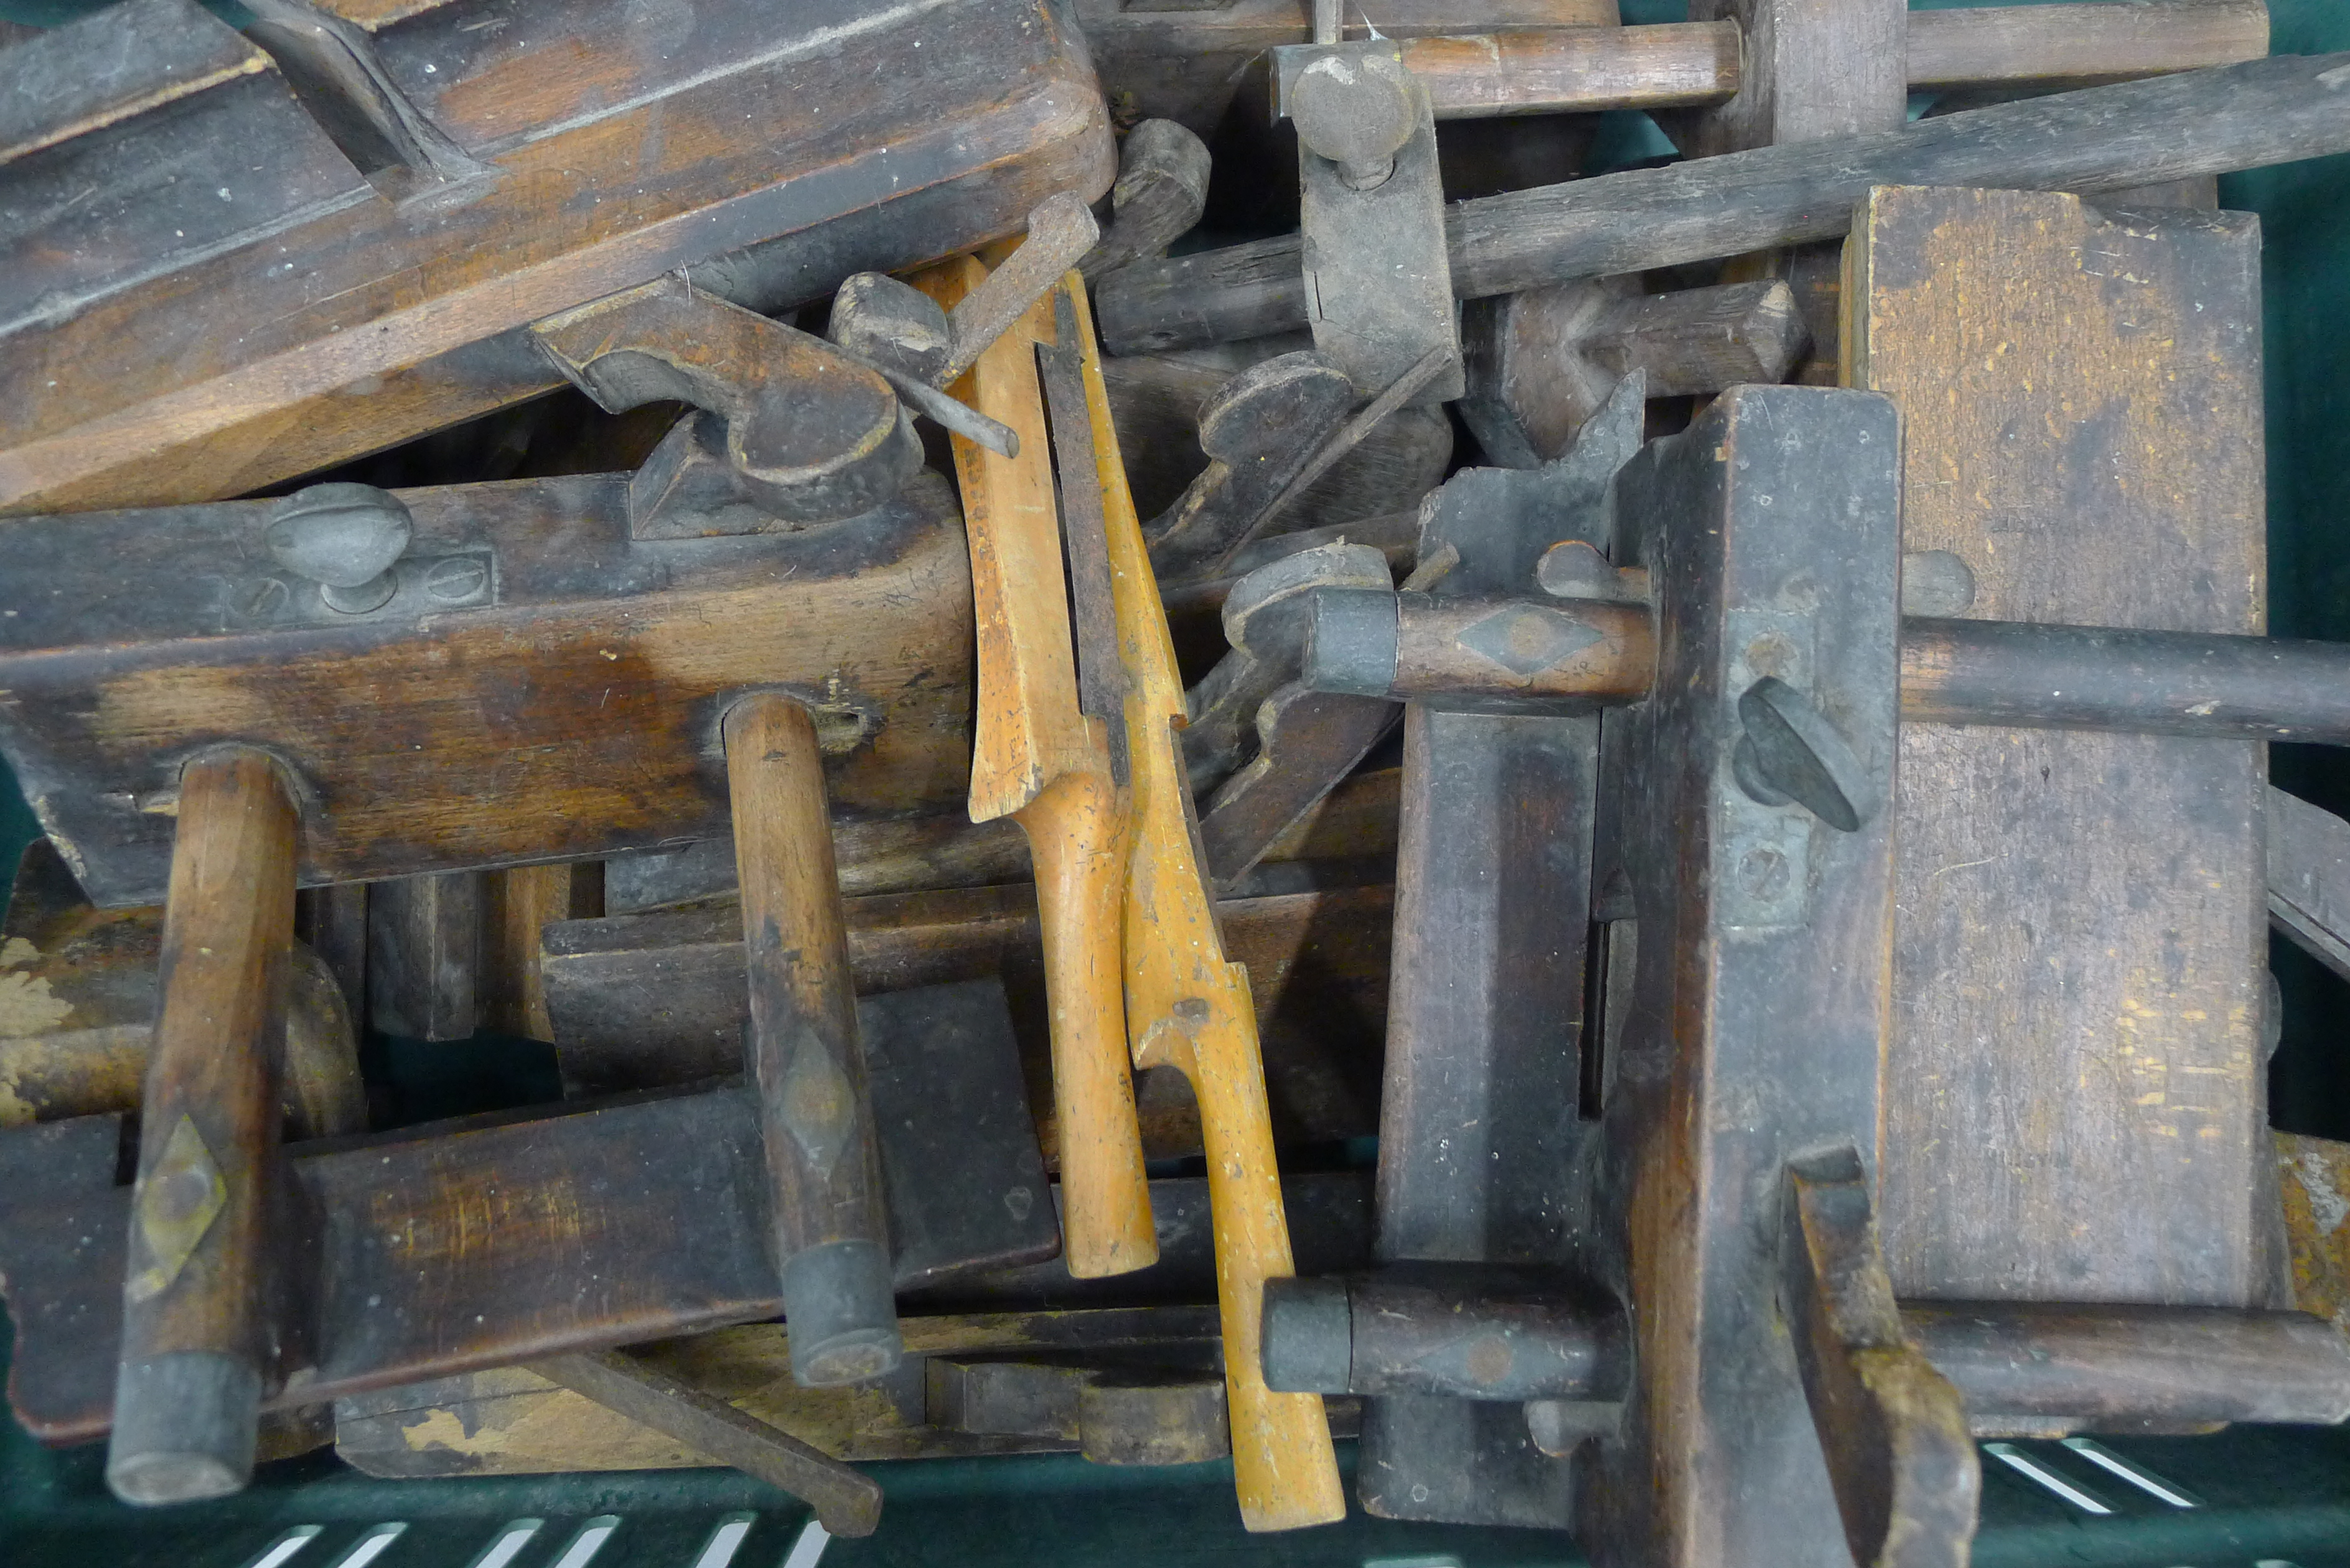 A quantity of wood working planes.